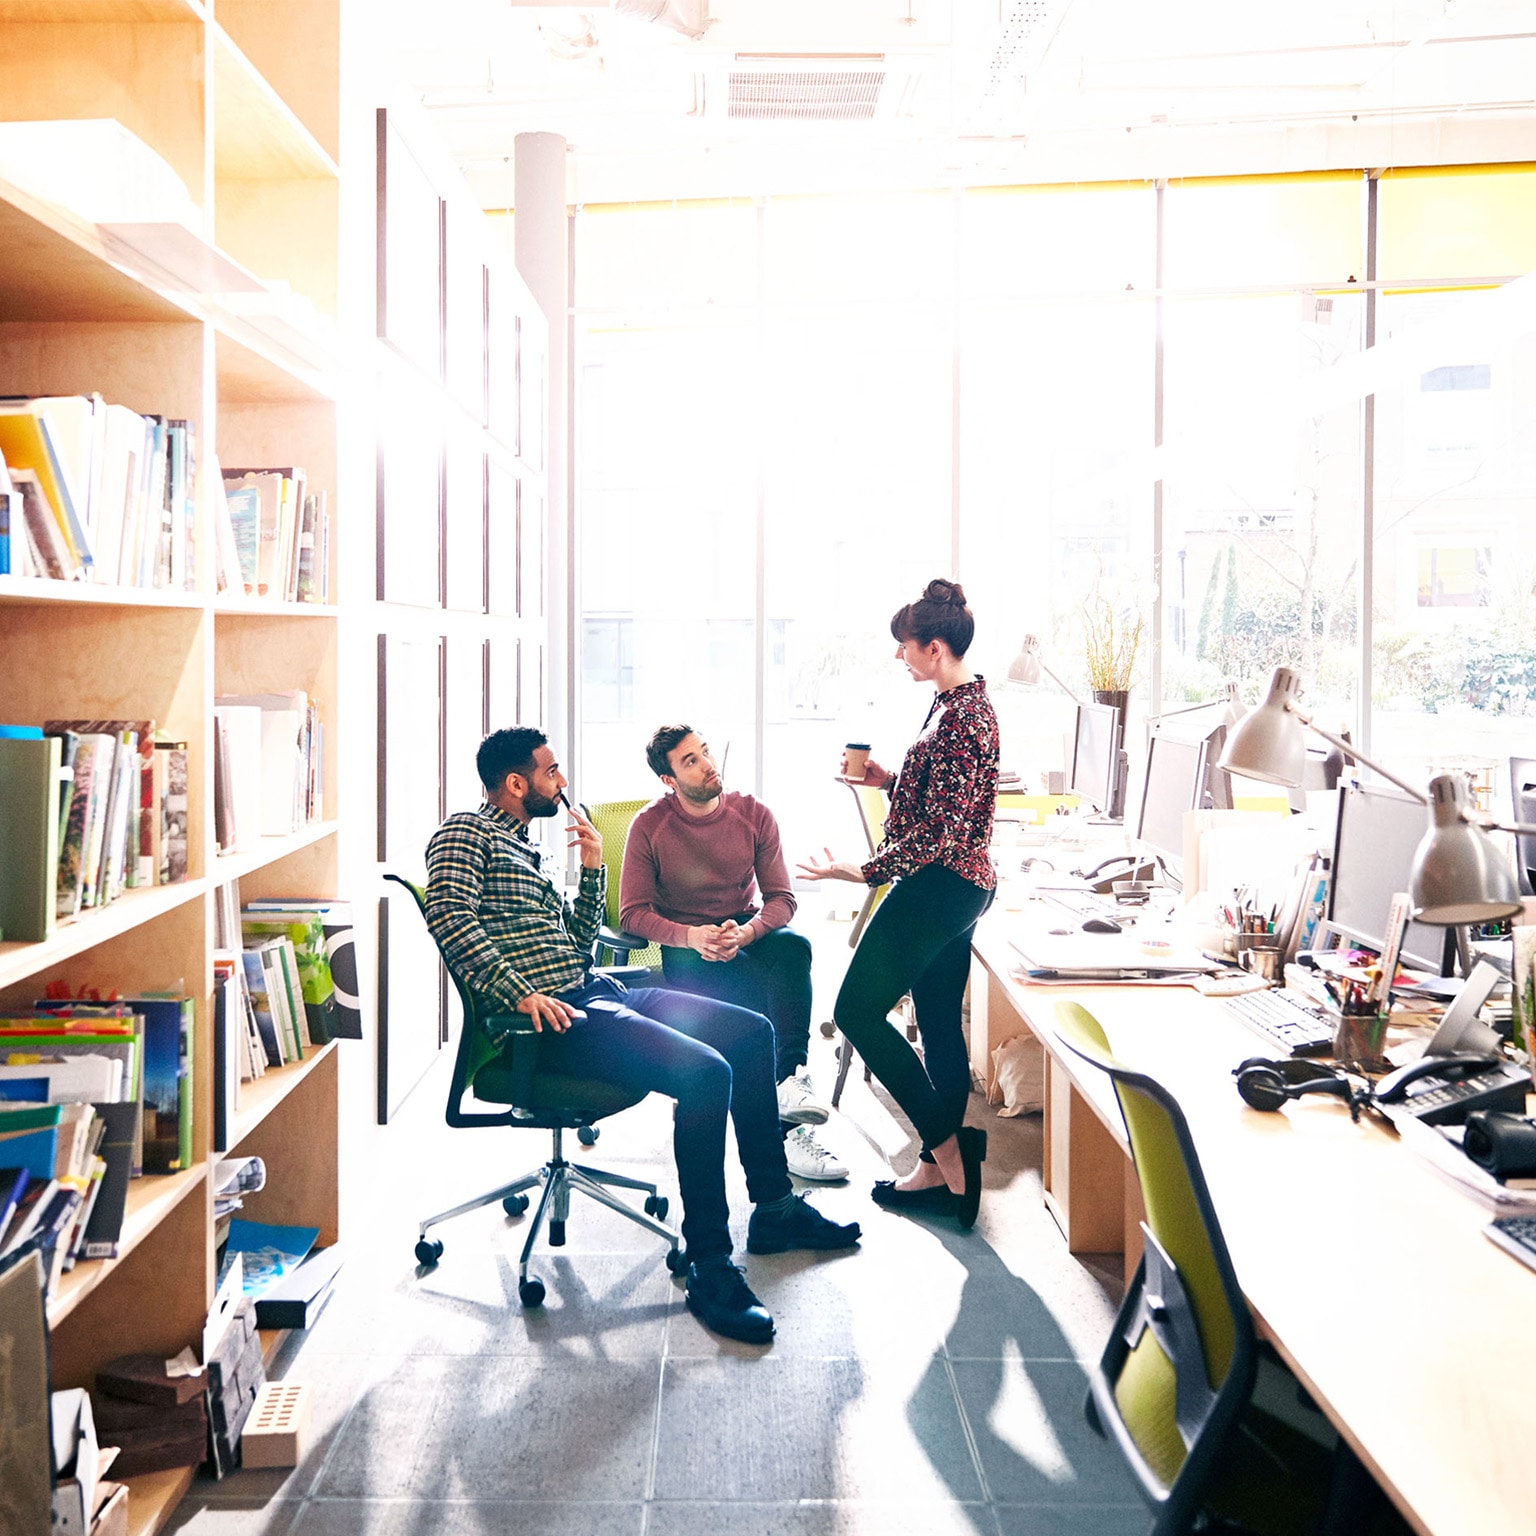 How to foster connection in the office space of today